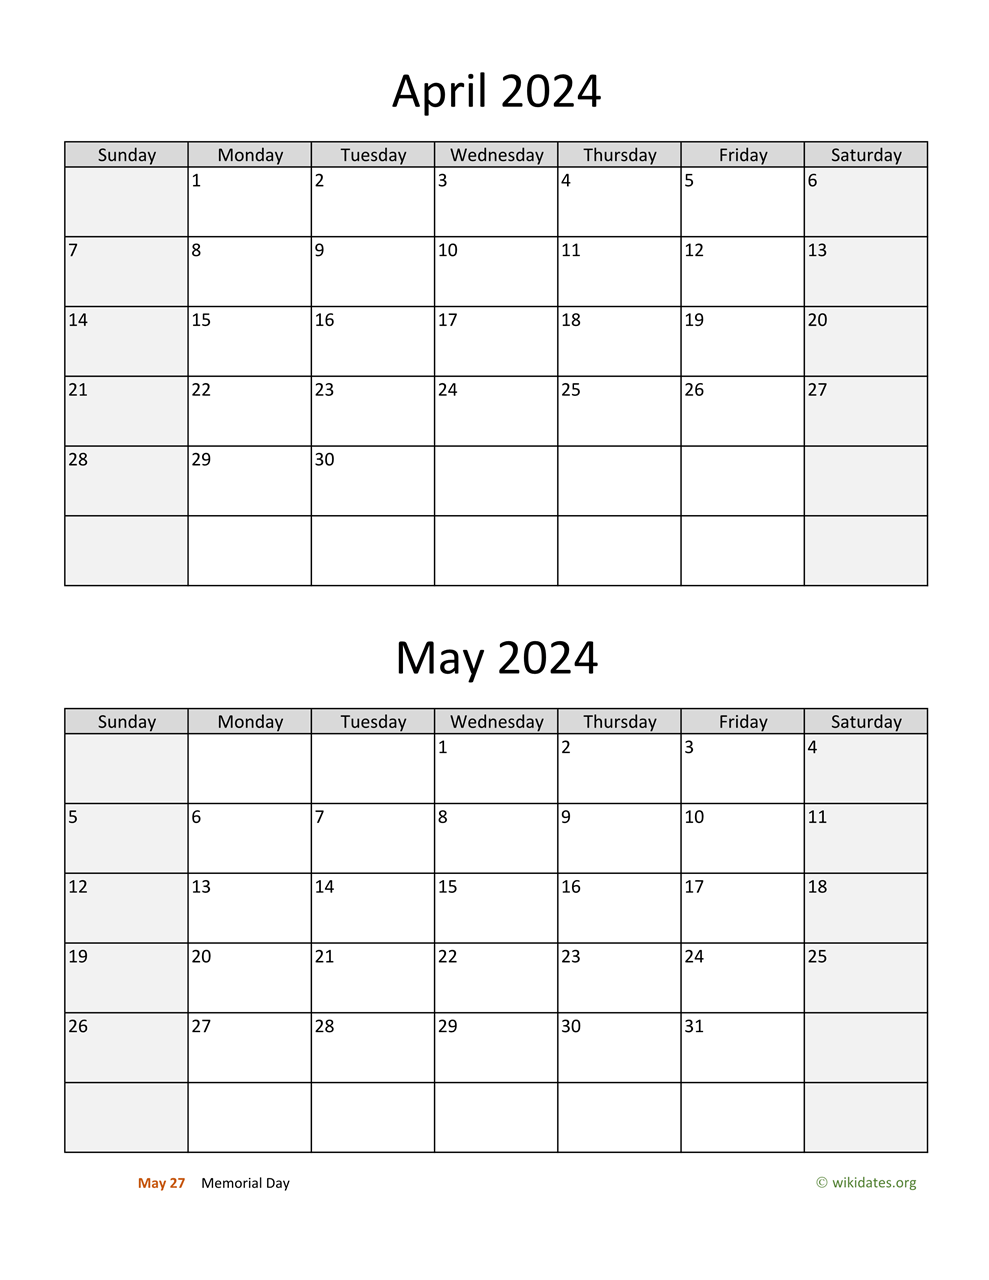 April And May 2024 Calendar | Wikidates for Printable April And May Calendar 2024